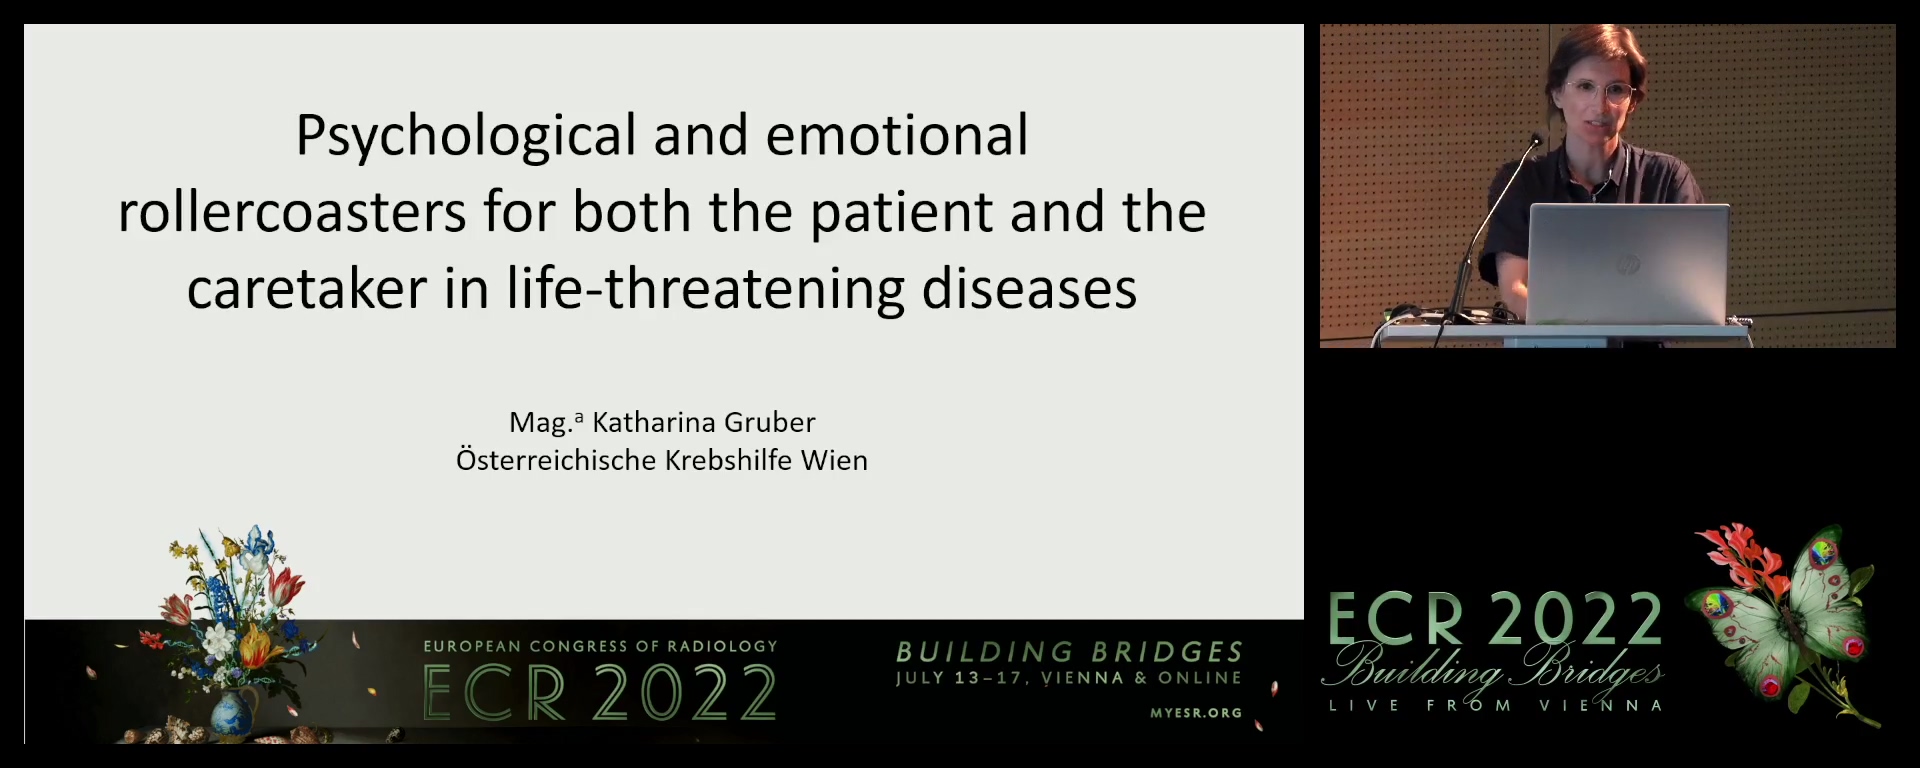 Psychological and emotional roller coasters both for the patient and caretaker in serious life-threatening diseases - Katharina Gruber, Vienna / AT